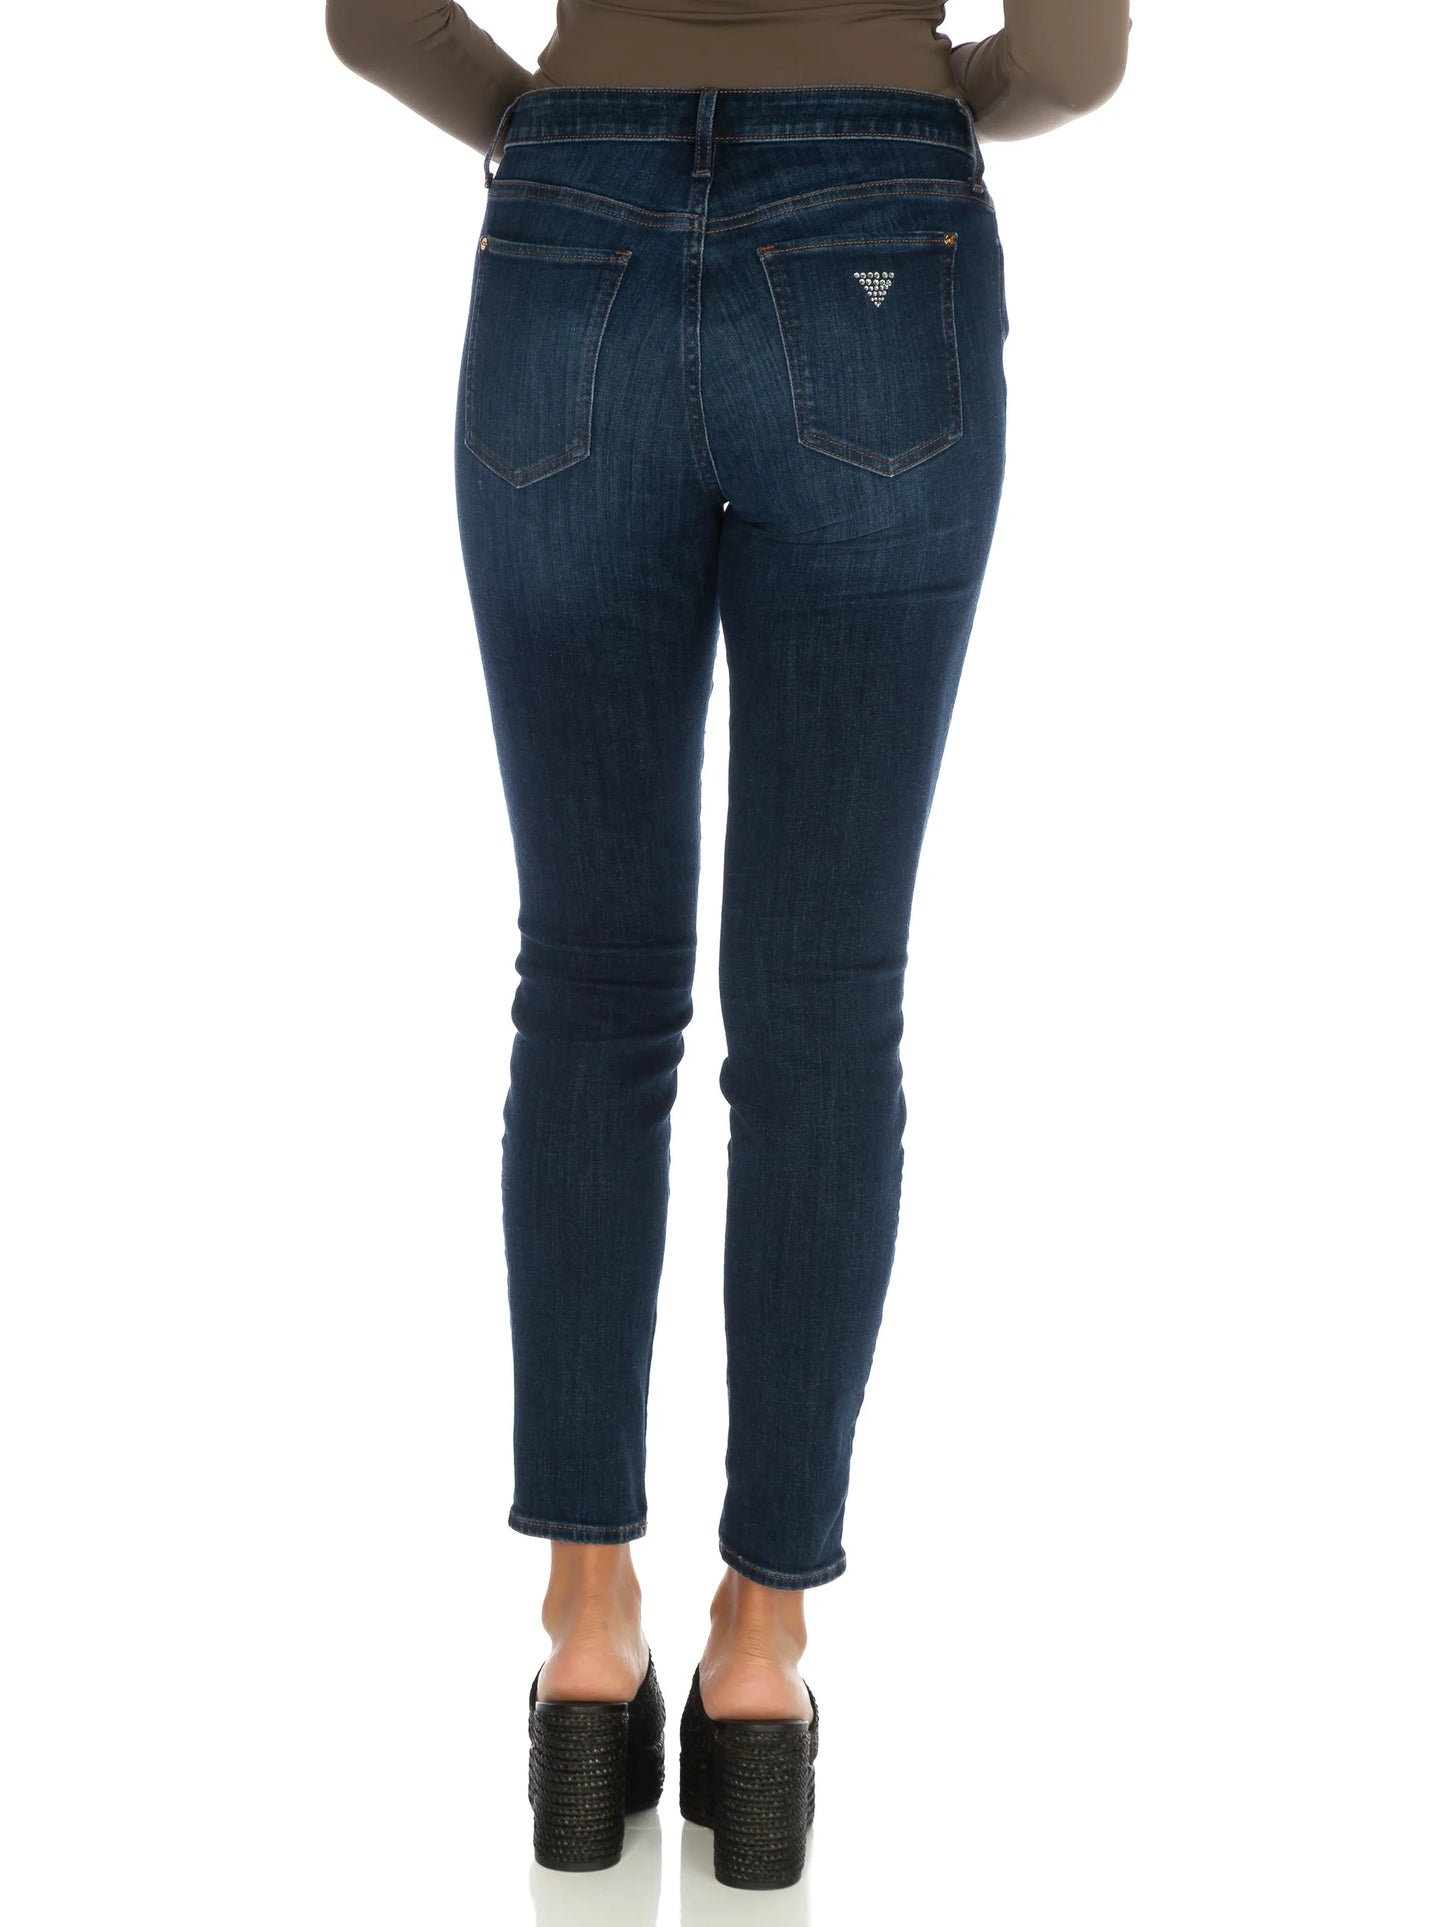 GUESS sexy curve jeans for women